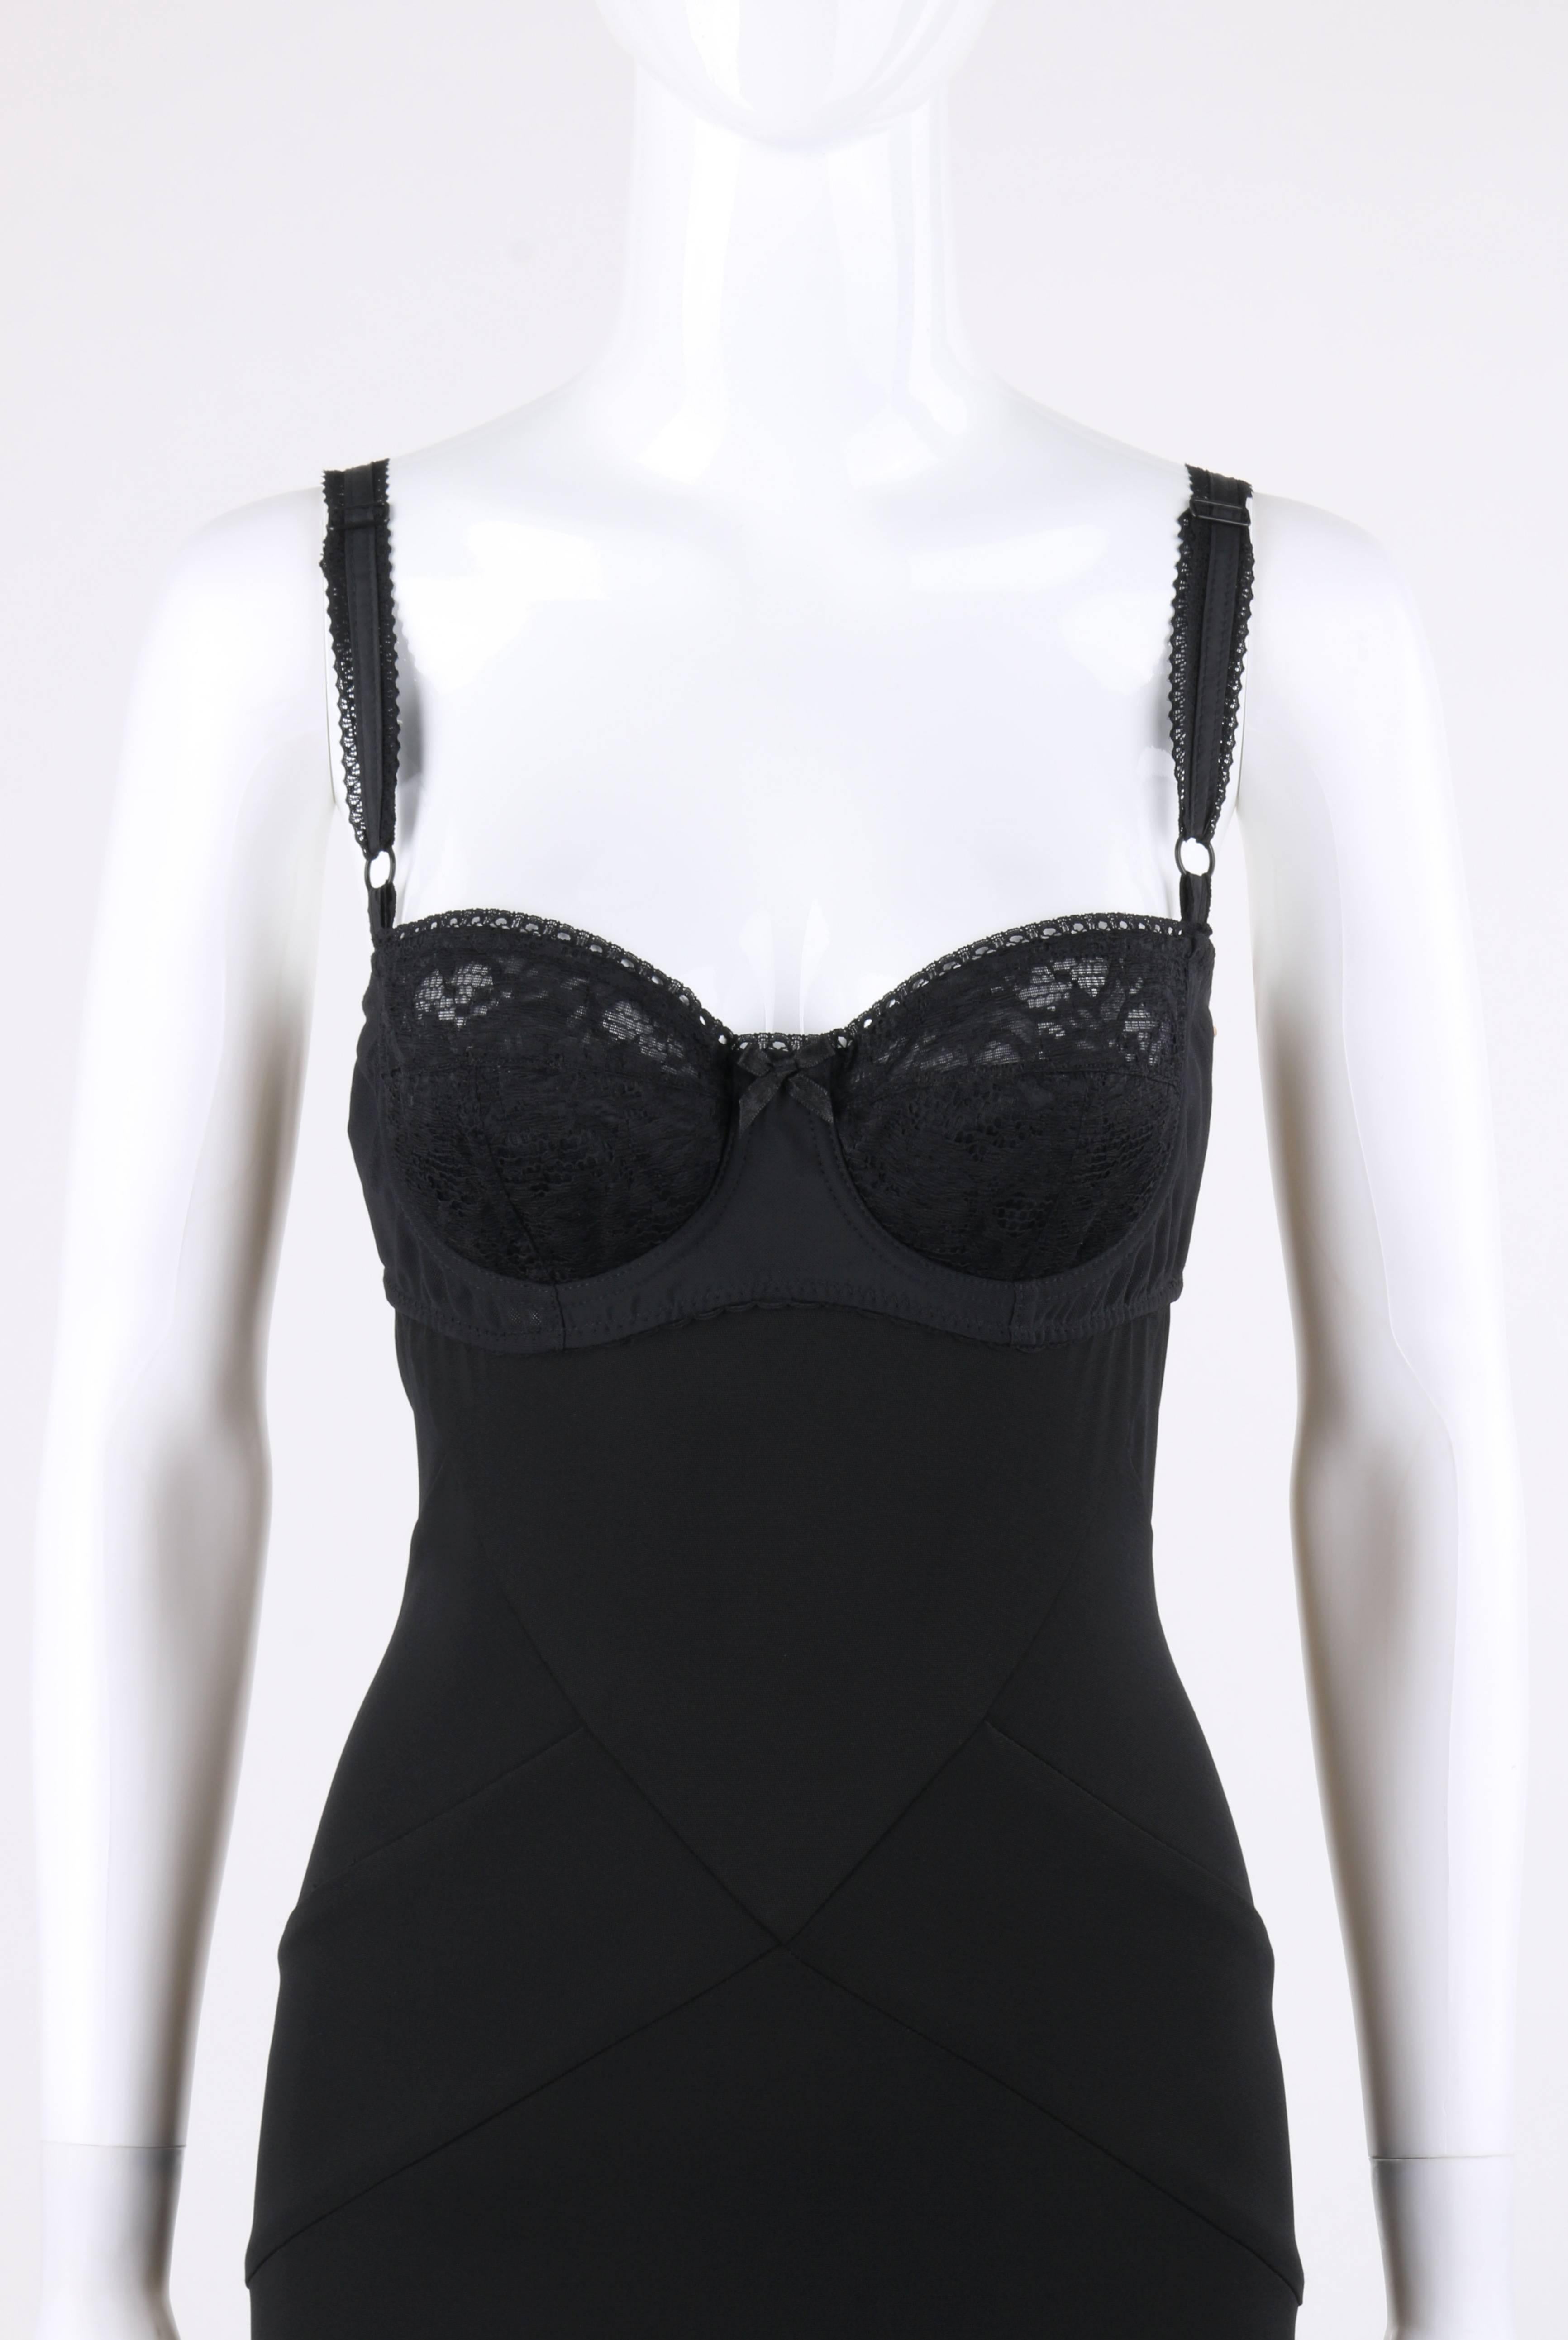 Dolce & Gabbana Autumn/Winter 1996 black knit lace bustier empire cocktail dress. Built-in mesh bra with black floral lace cups. Underwire. Center front bow detail. Adjustable scallop lace detail straps. Long shift style. Empire waistline. Center